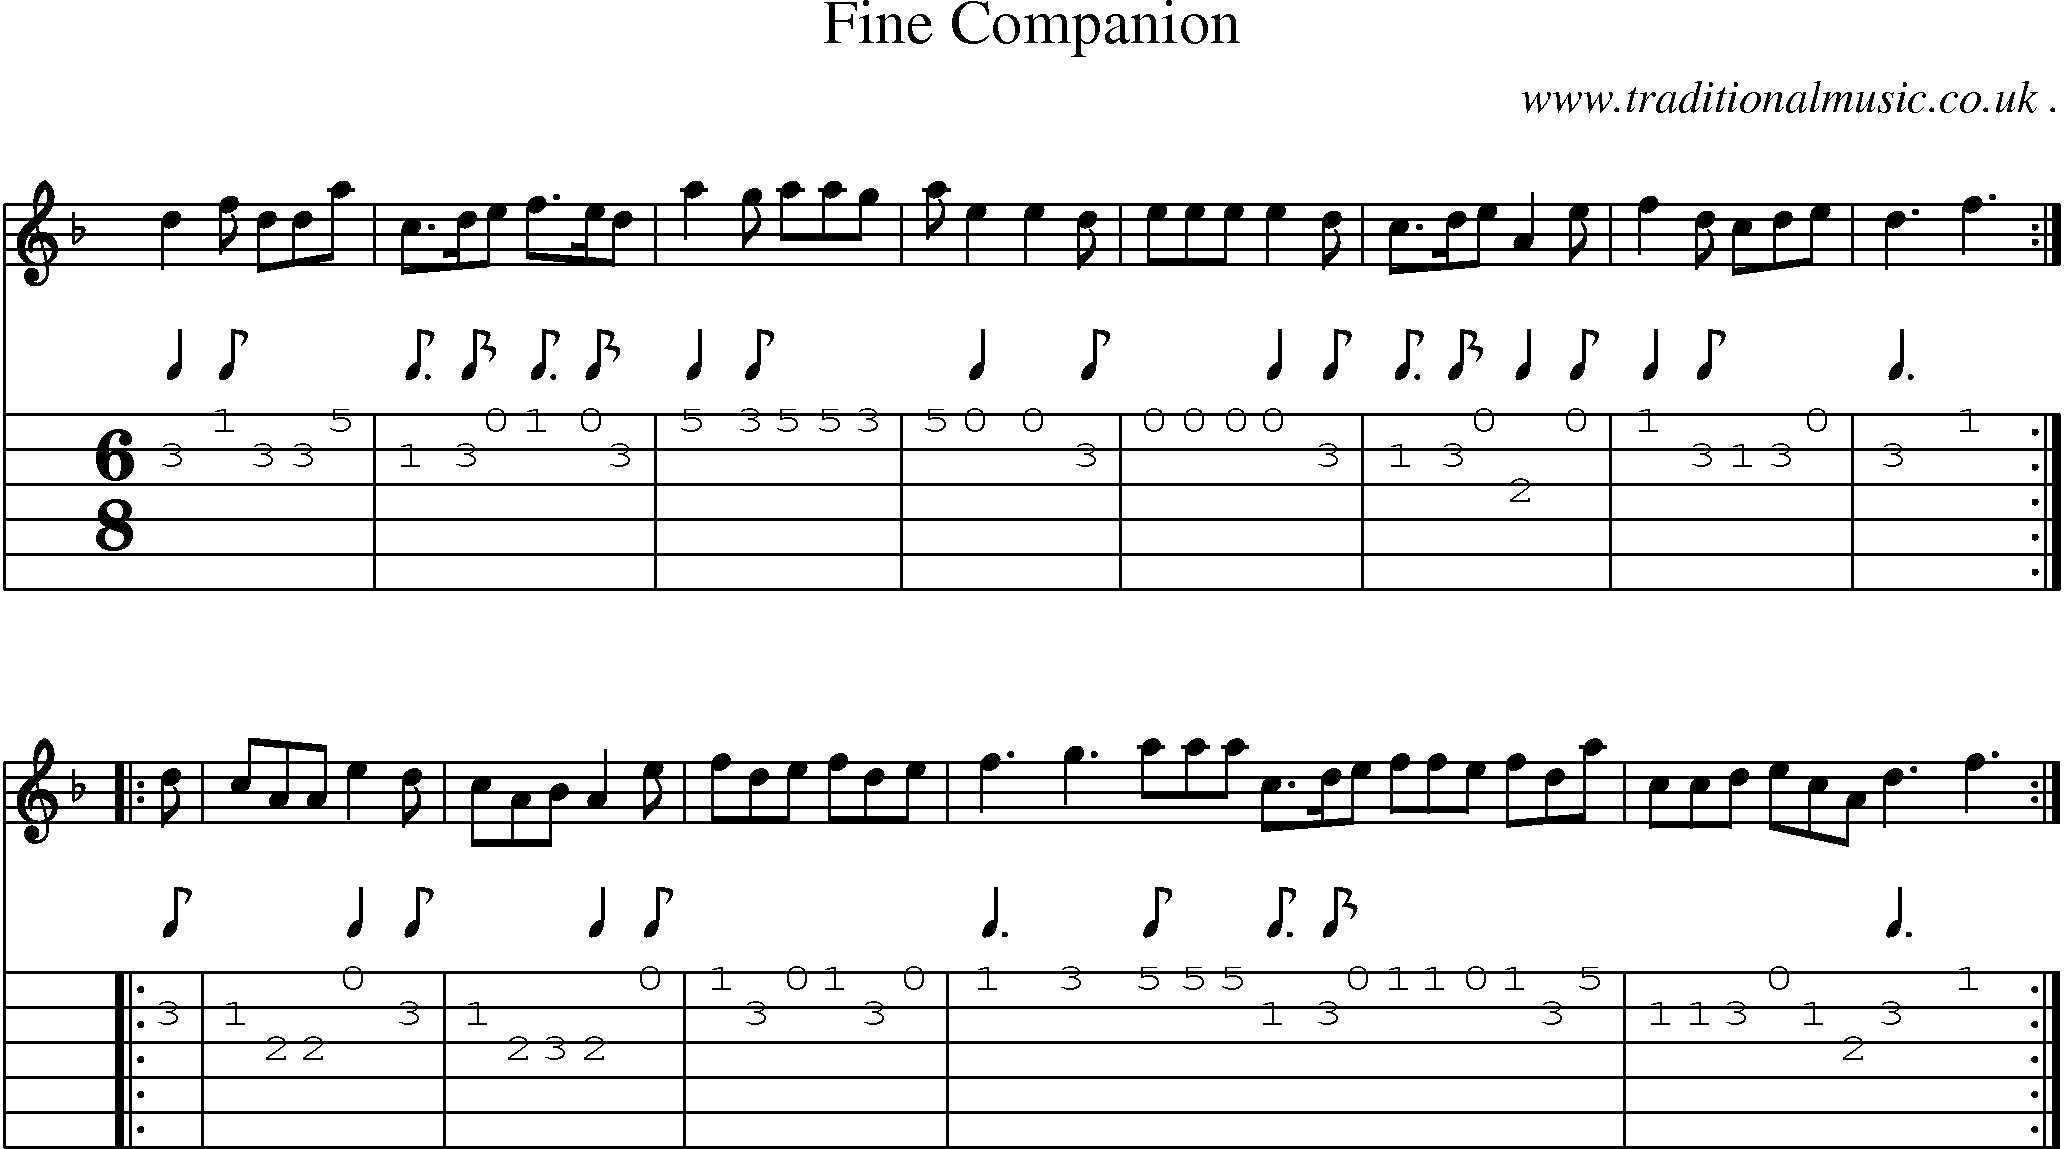 Sheet-Music and Guitar Tabs for Fine Companion